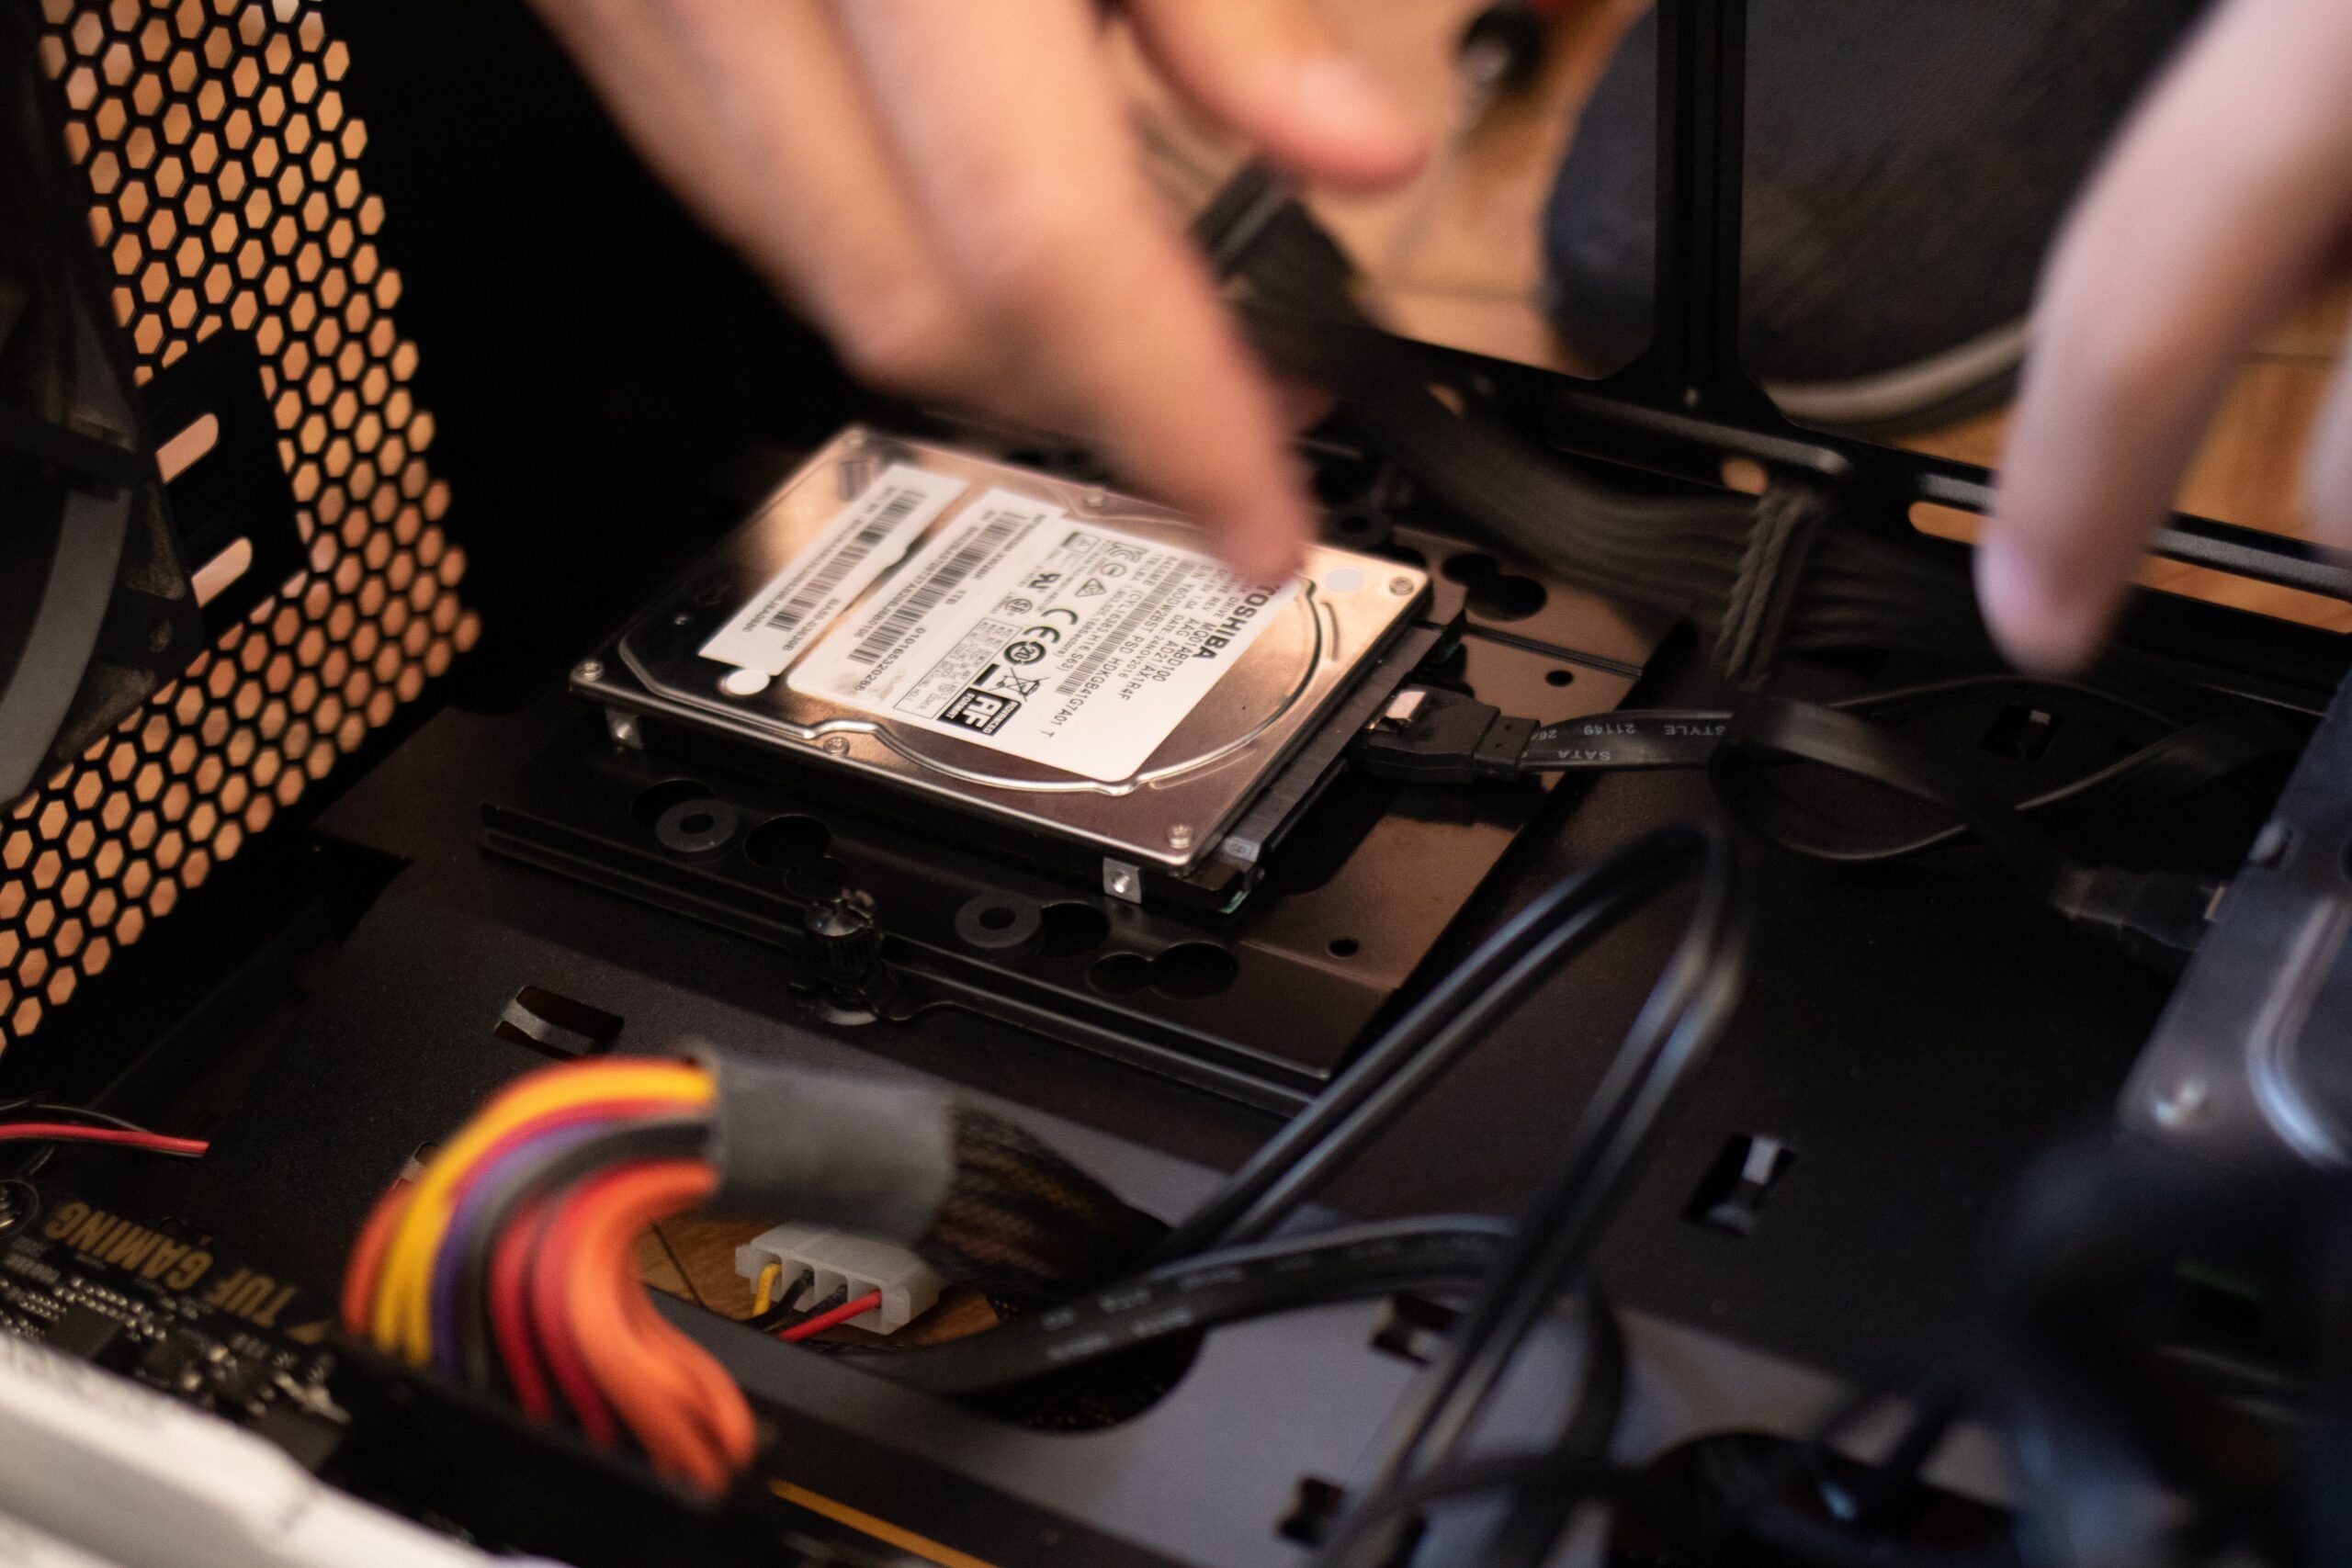 A computer hard drive being replaced in a case